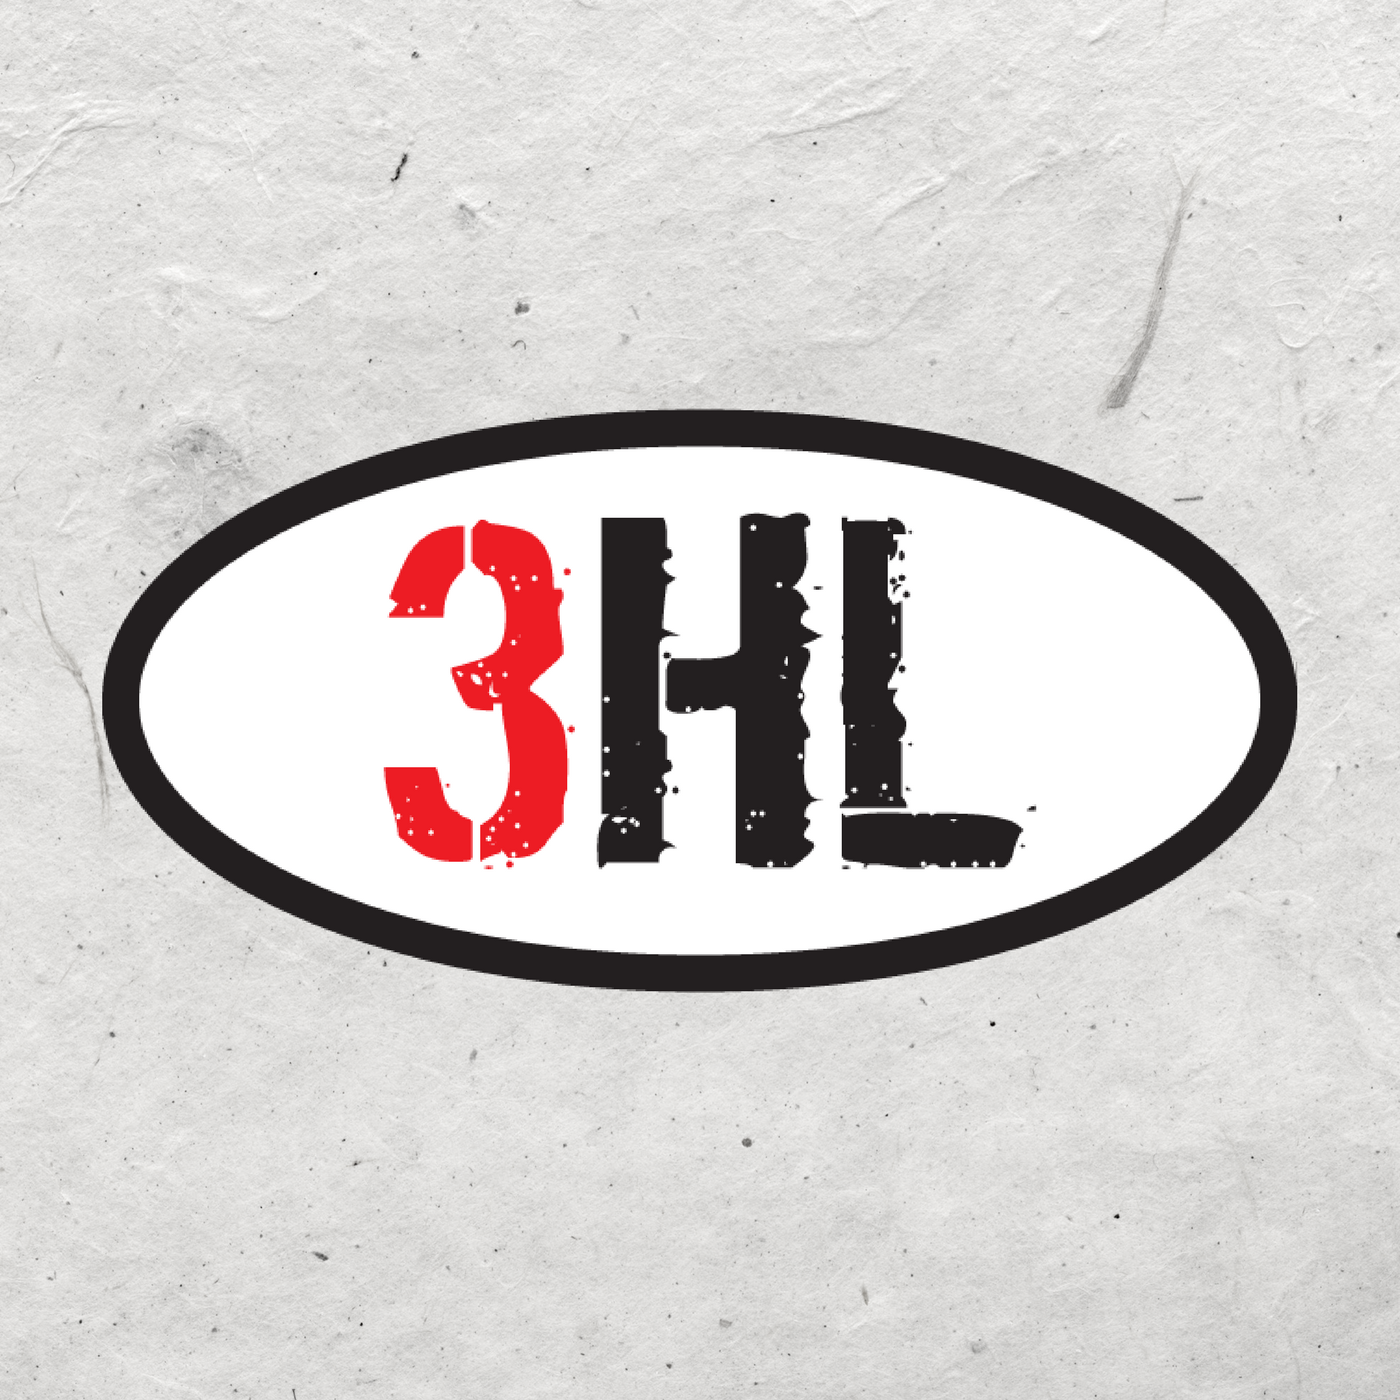 3HL Hour 3: What do NFL Players look for when the schedule is released?